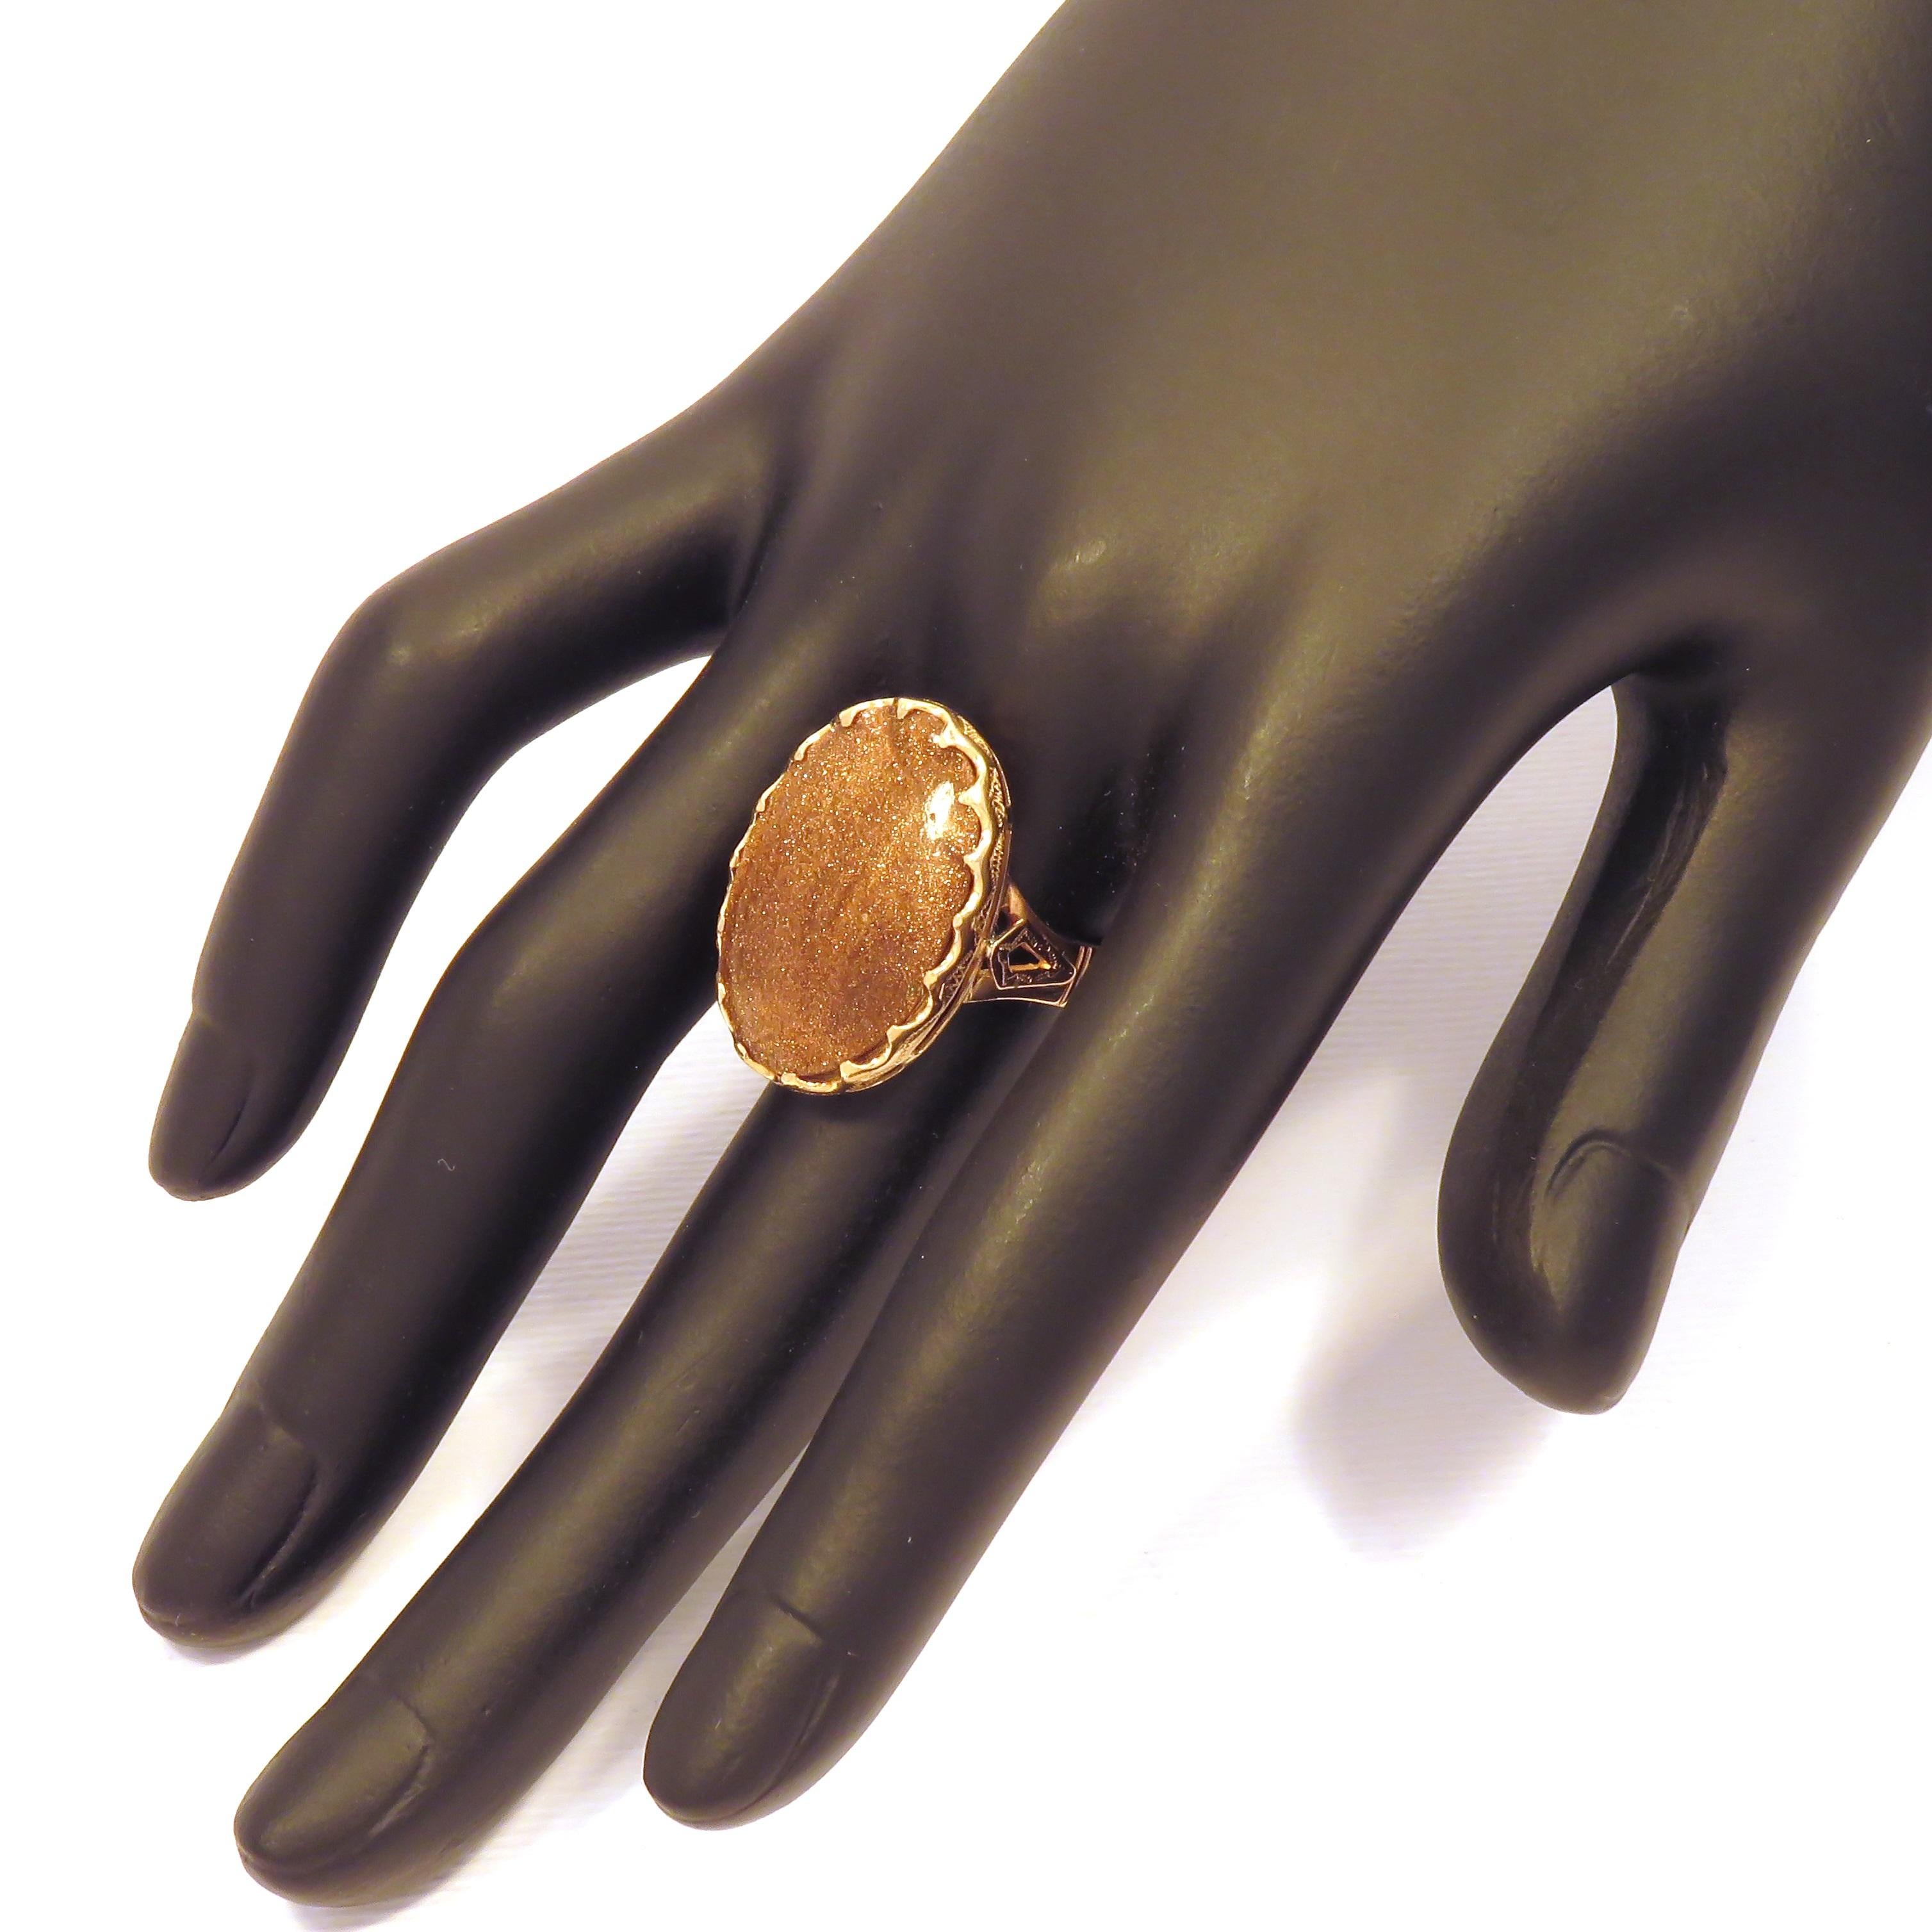 This vintage ring features a large natural oval cabochon sun stone perched on the top of an 18 karat rose gold engraved shank dating 1970'. The size of the stone is 24x18 mm / 0.944x0.708 inches. US finger size is 7.75, French size 56, Italian size